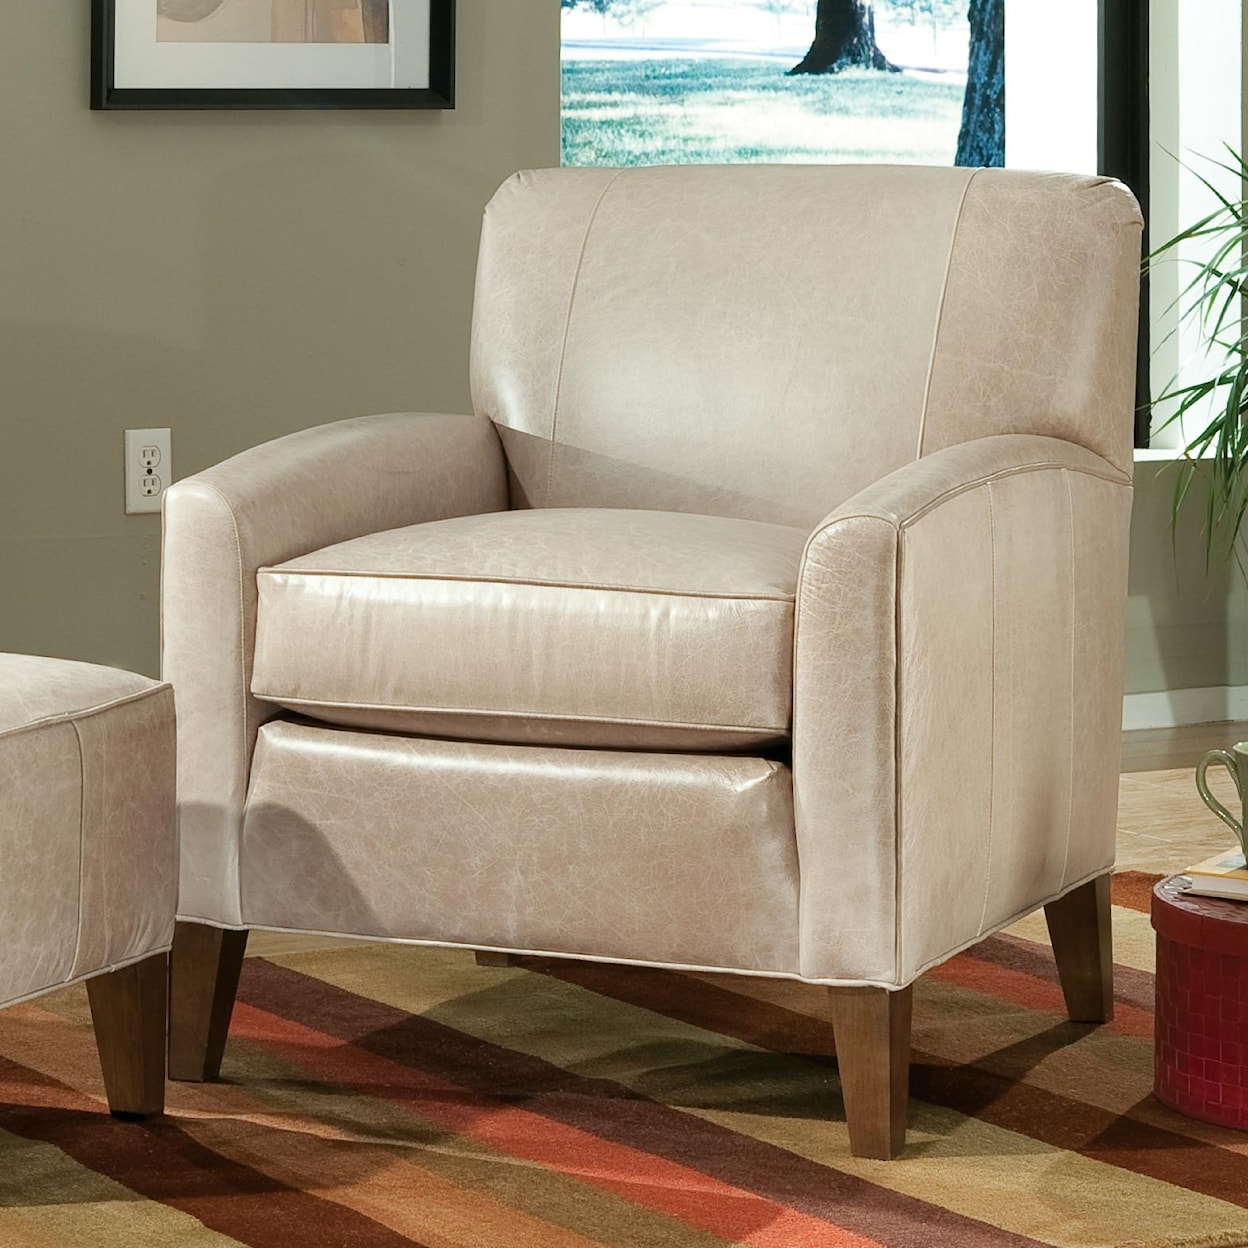 Smith Brothers Accent Chairs and Ottomans SB Contemporary Chair and Ottoman